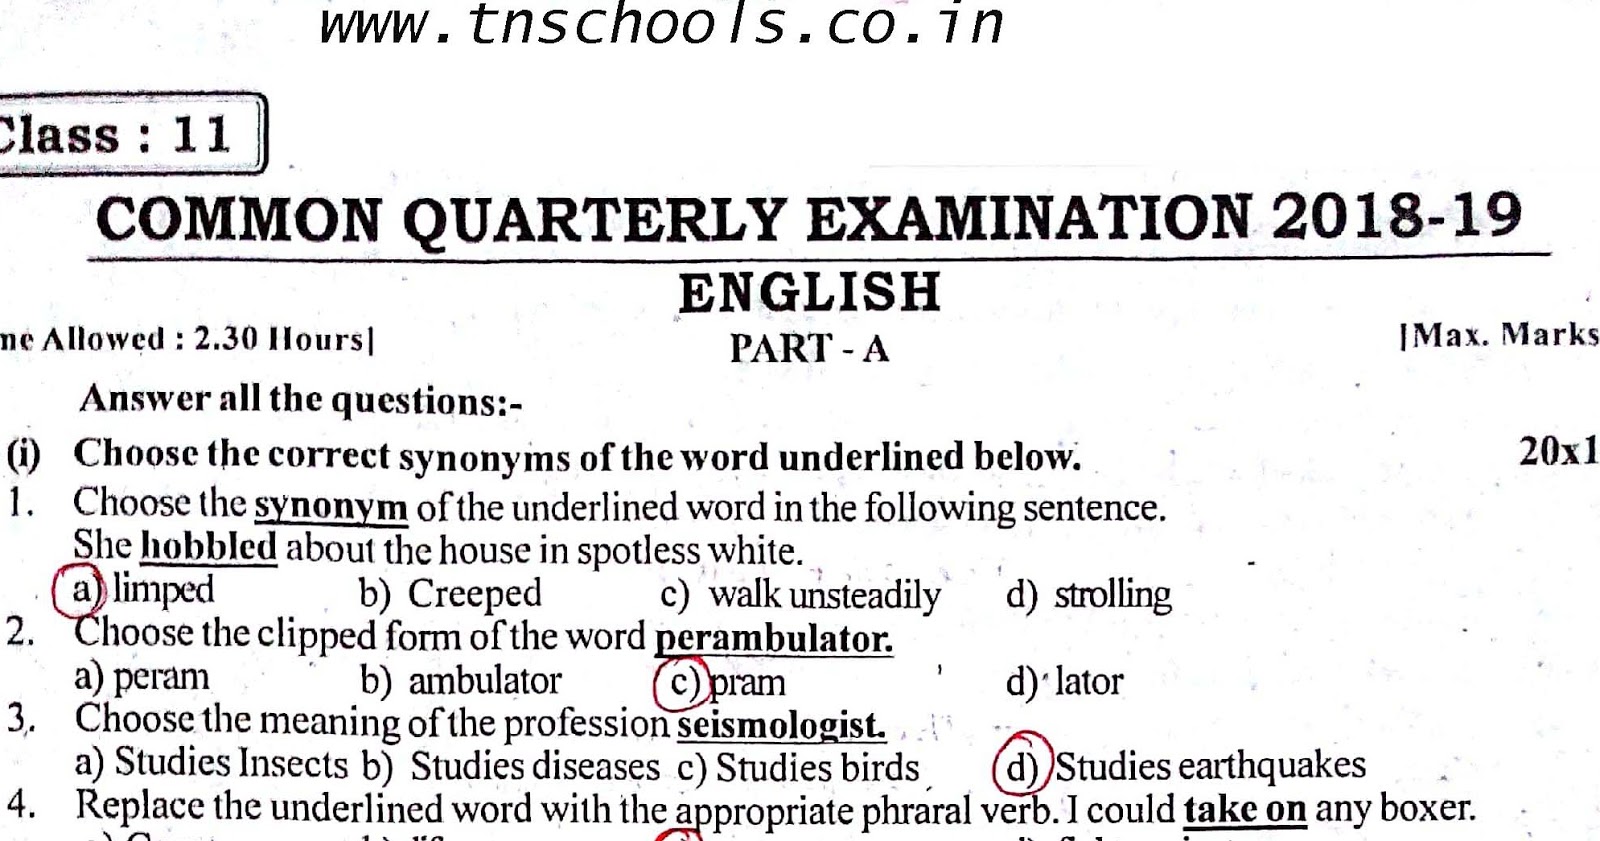 11th std quarterly examination question paper and answer key 2018.